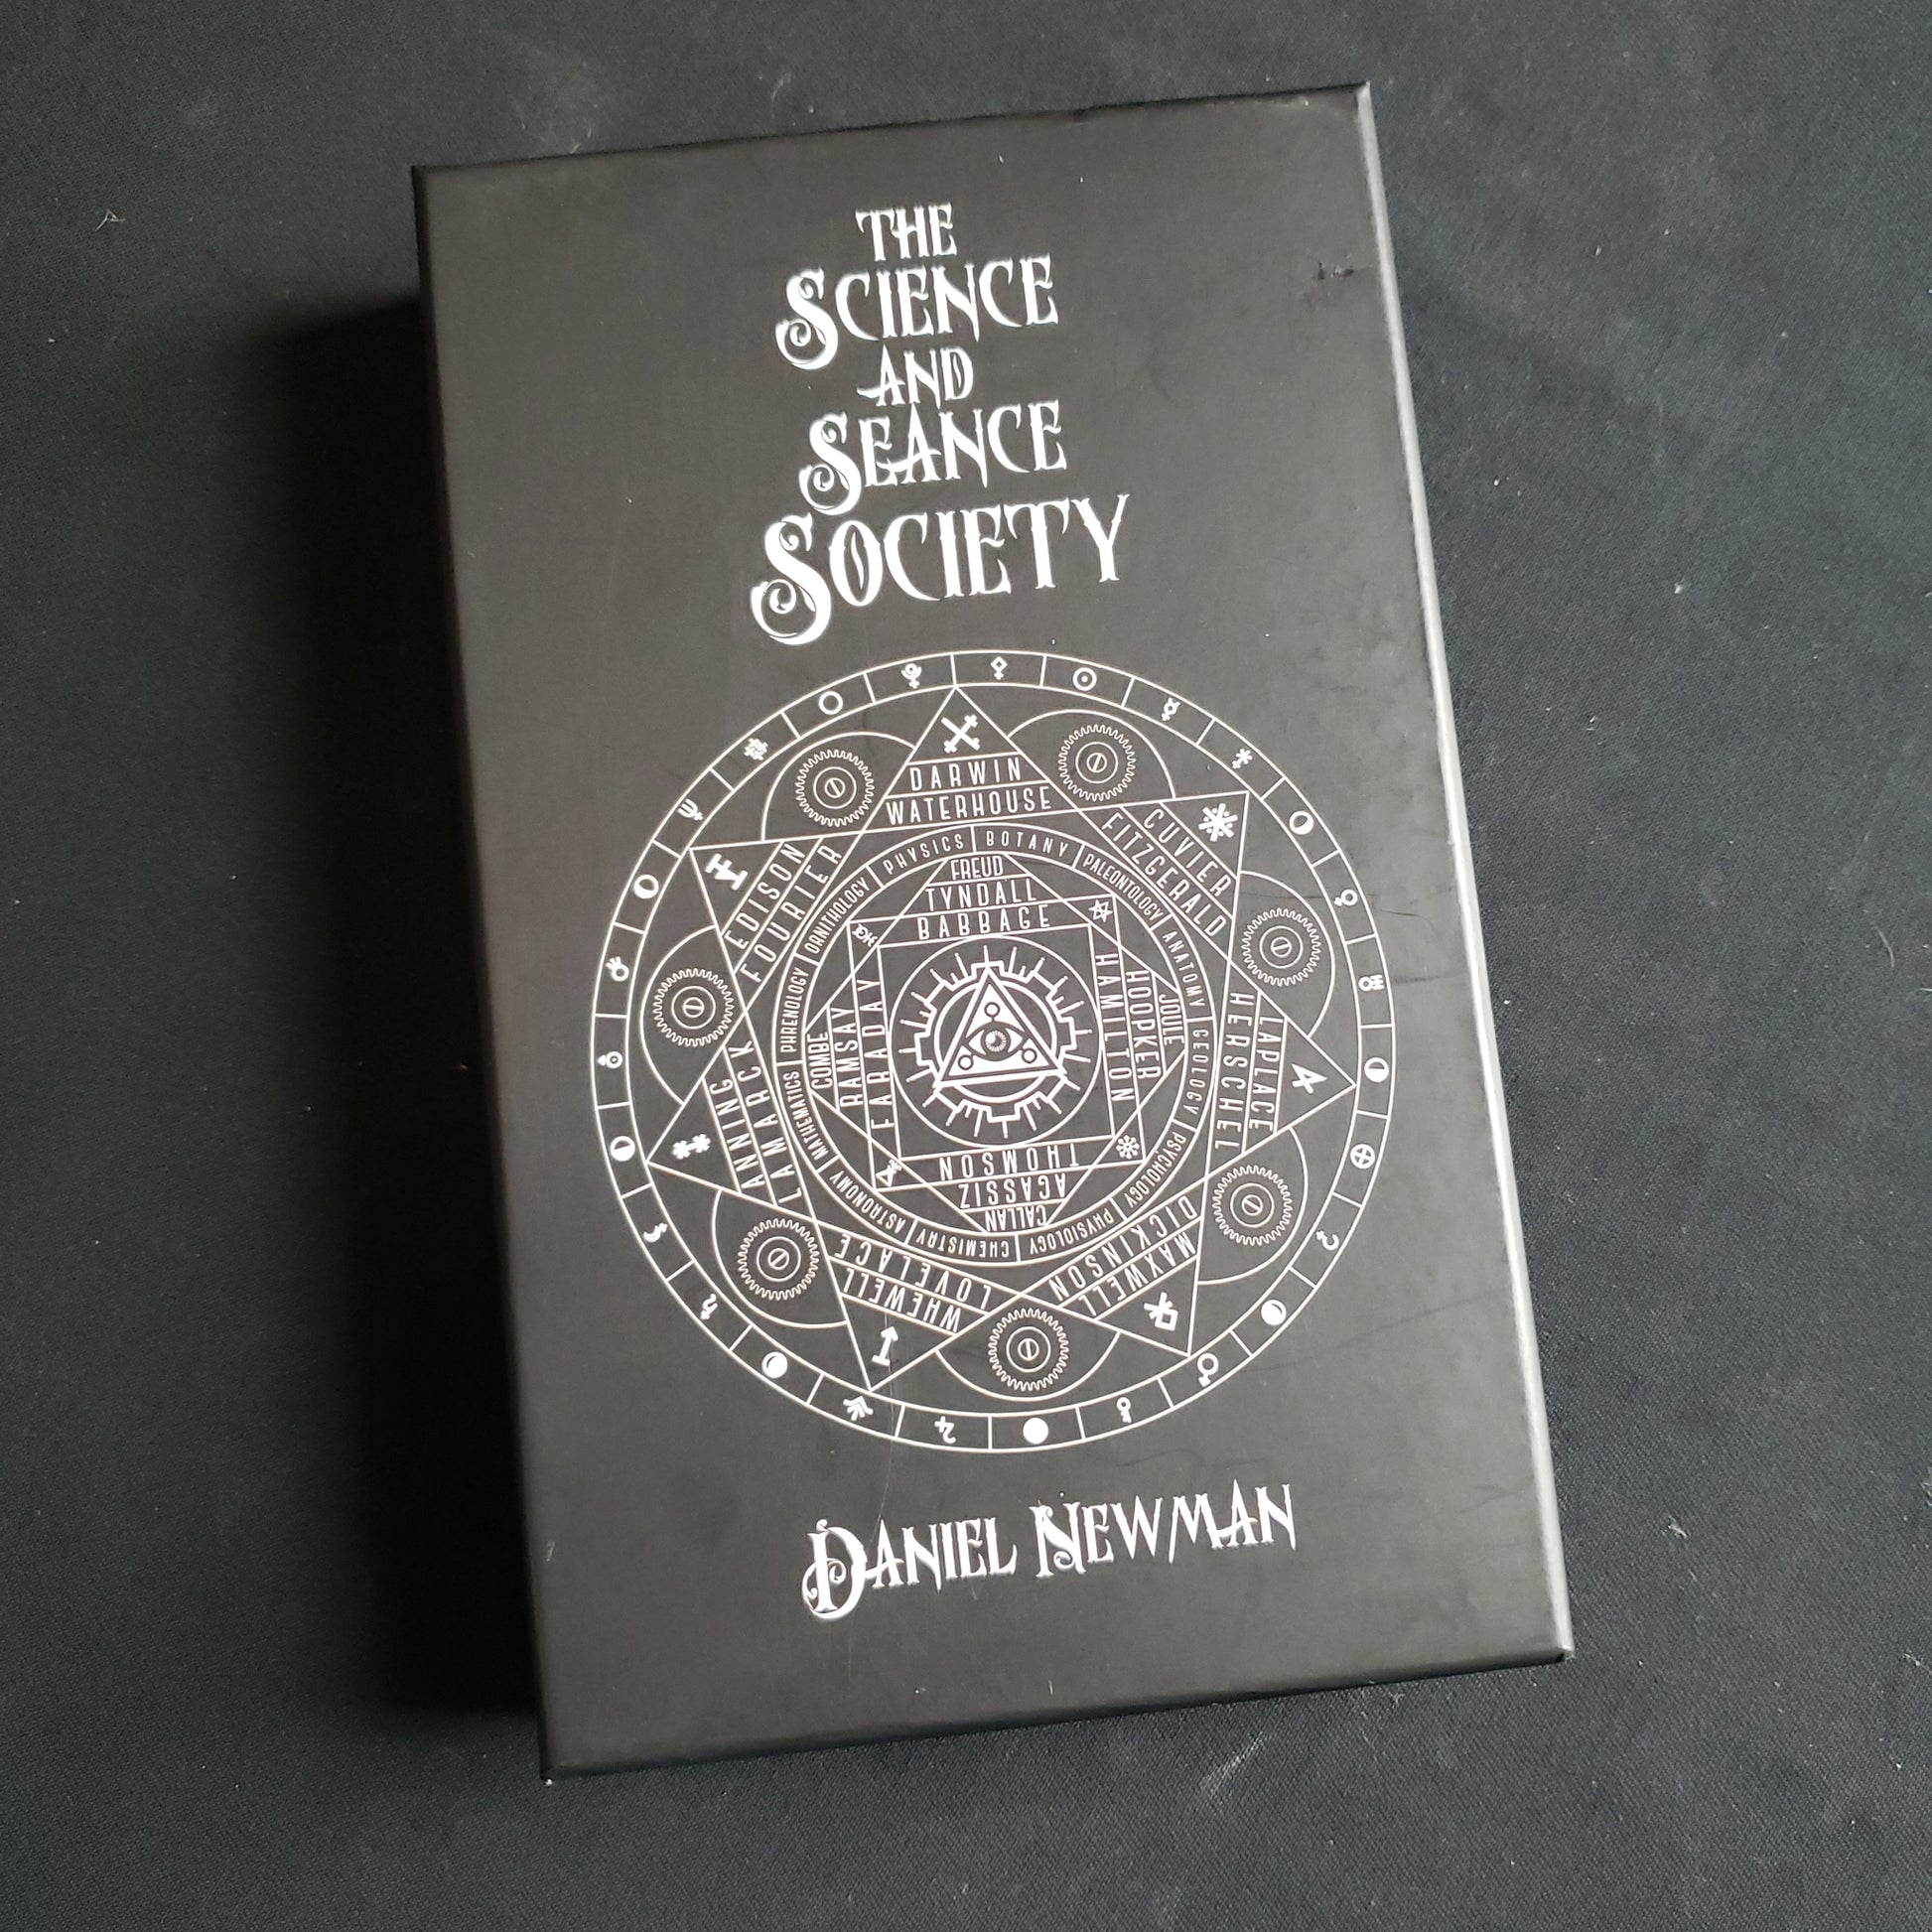 Image shows the front cover of the box of the Science and Seance Society board game